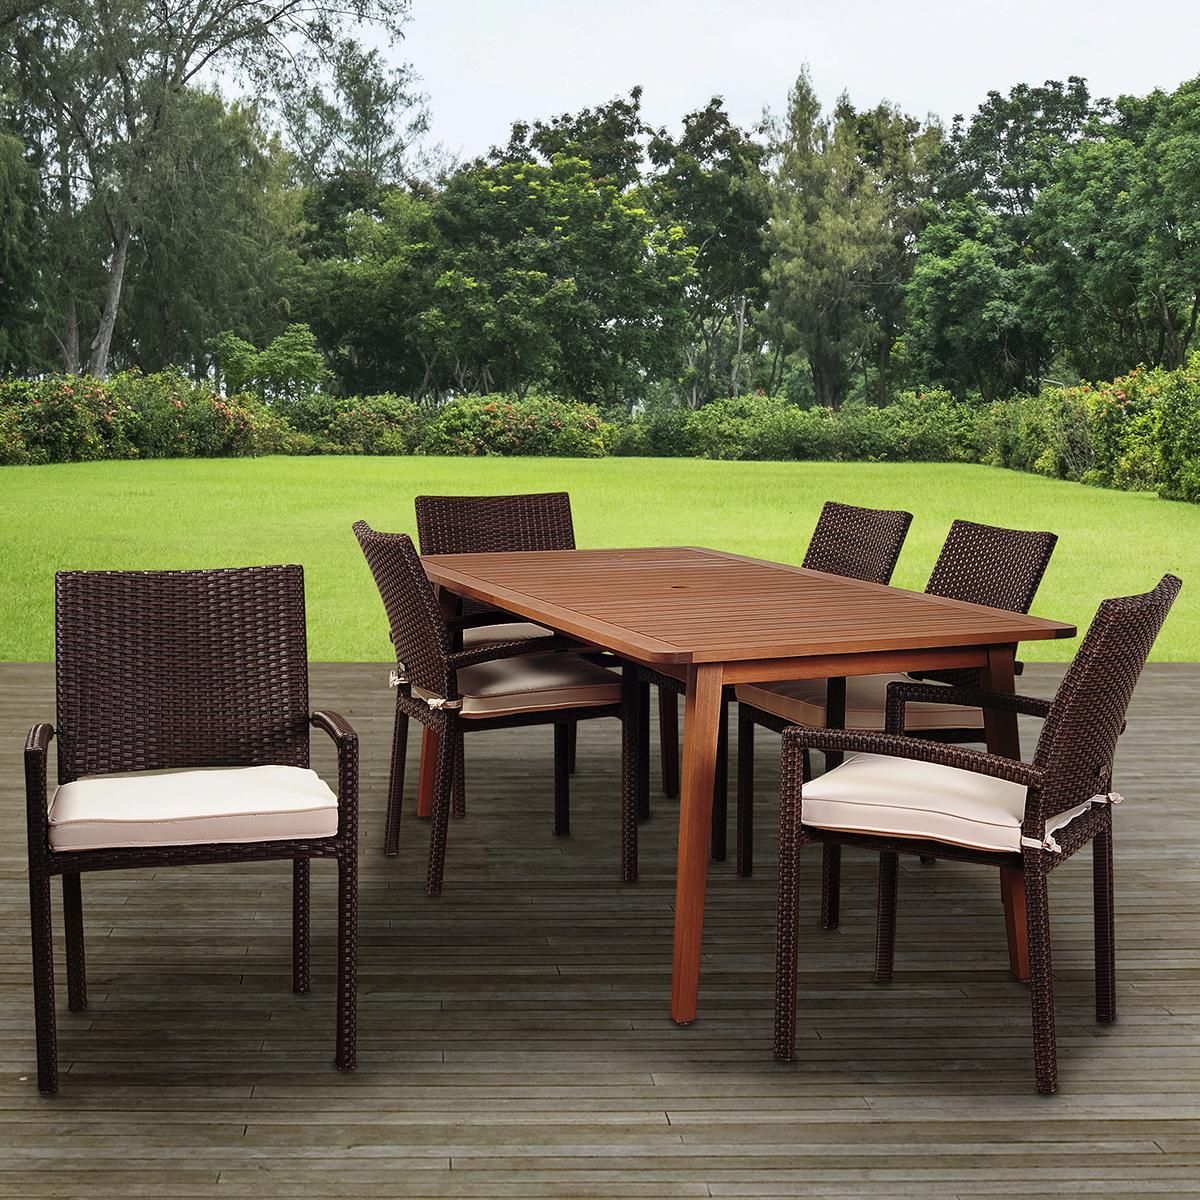 Latest Rectangular Teak And Eucalyptus Patio Dining Sets Within Product Main Image  (View 11 of 15)